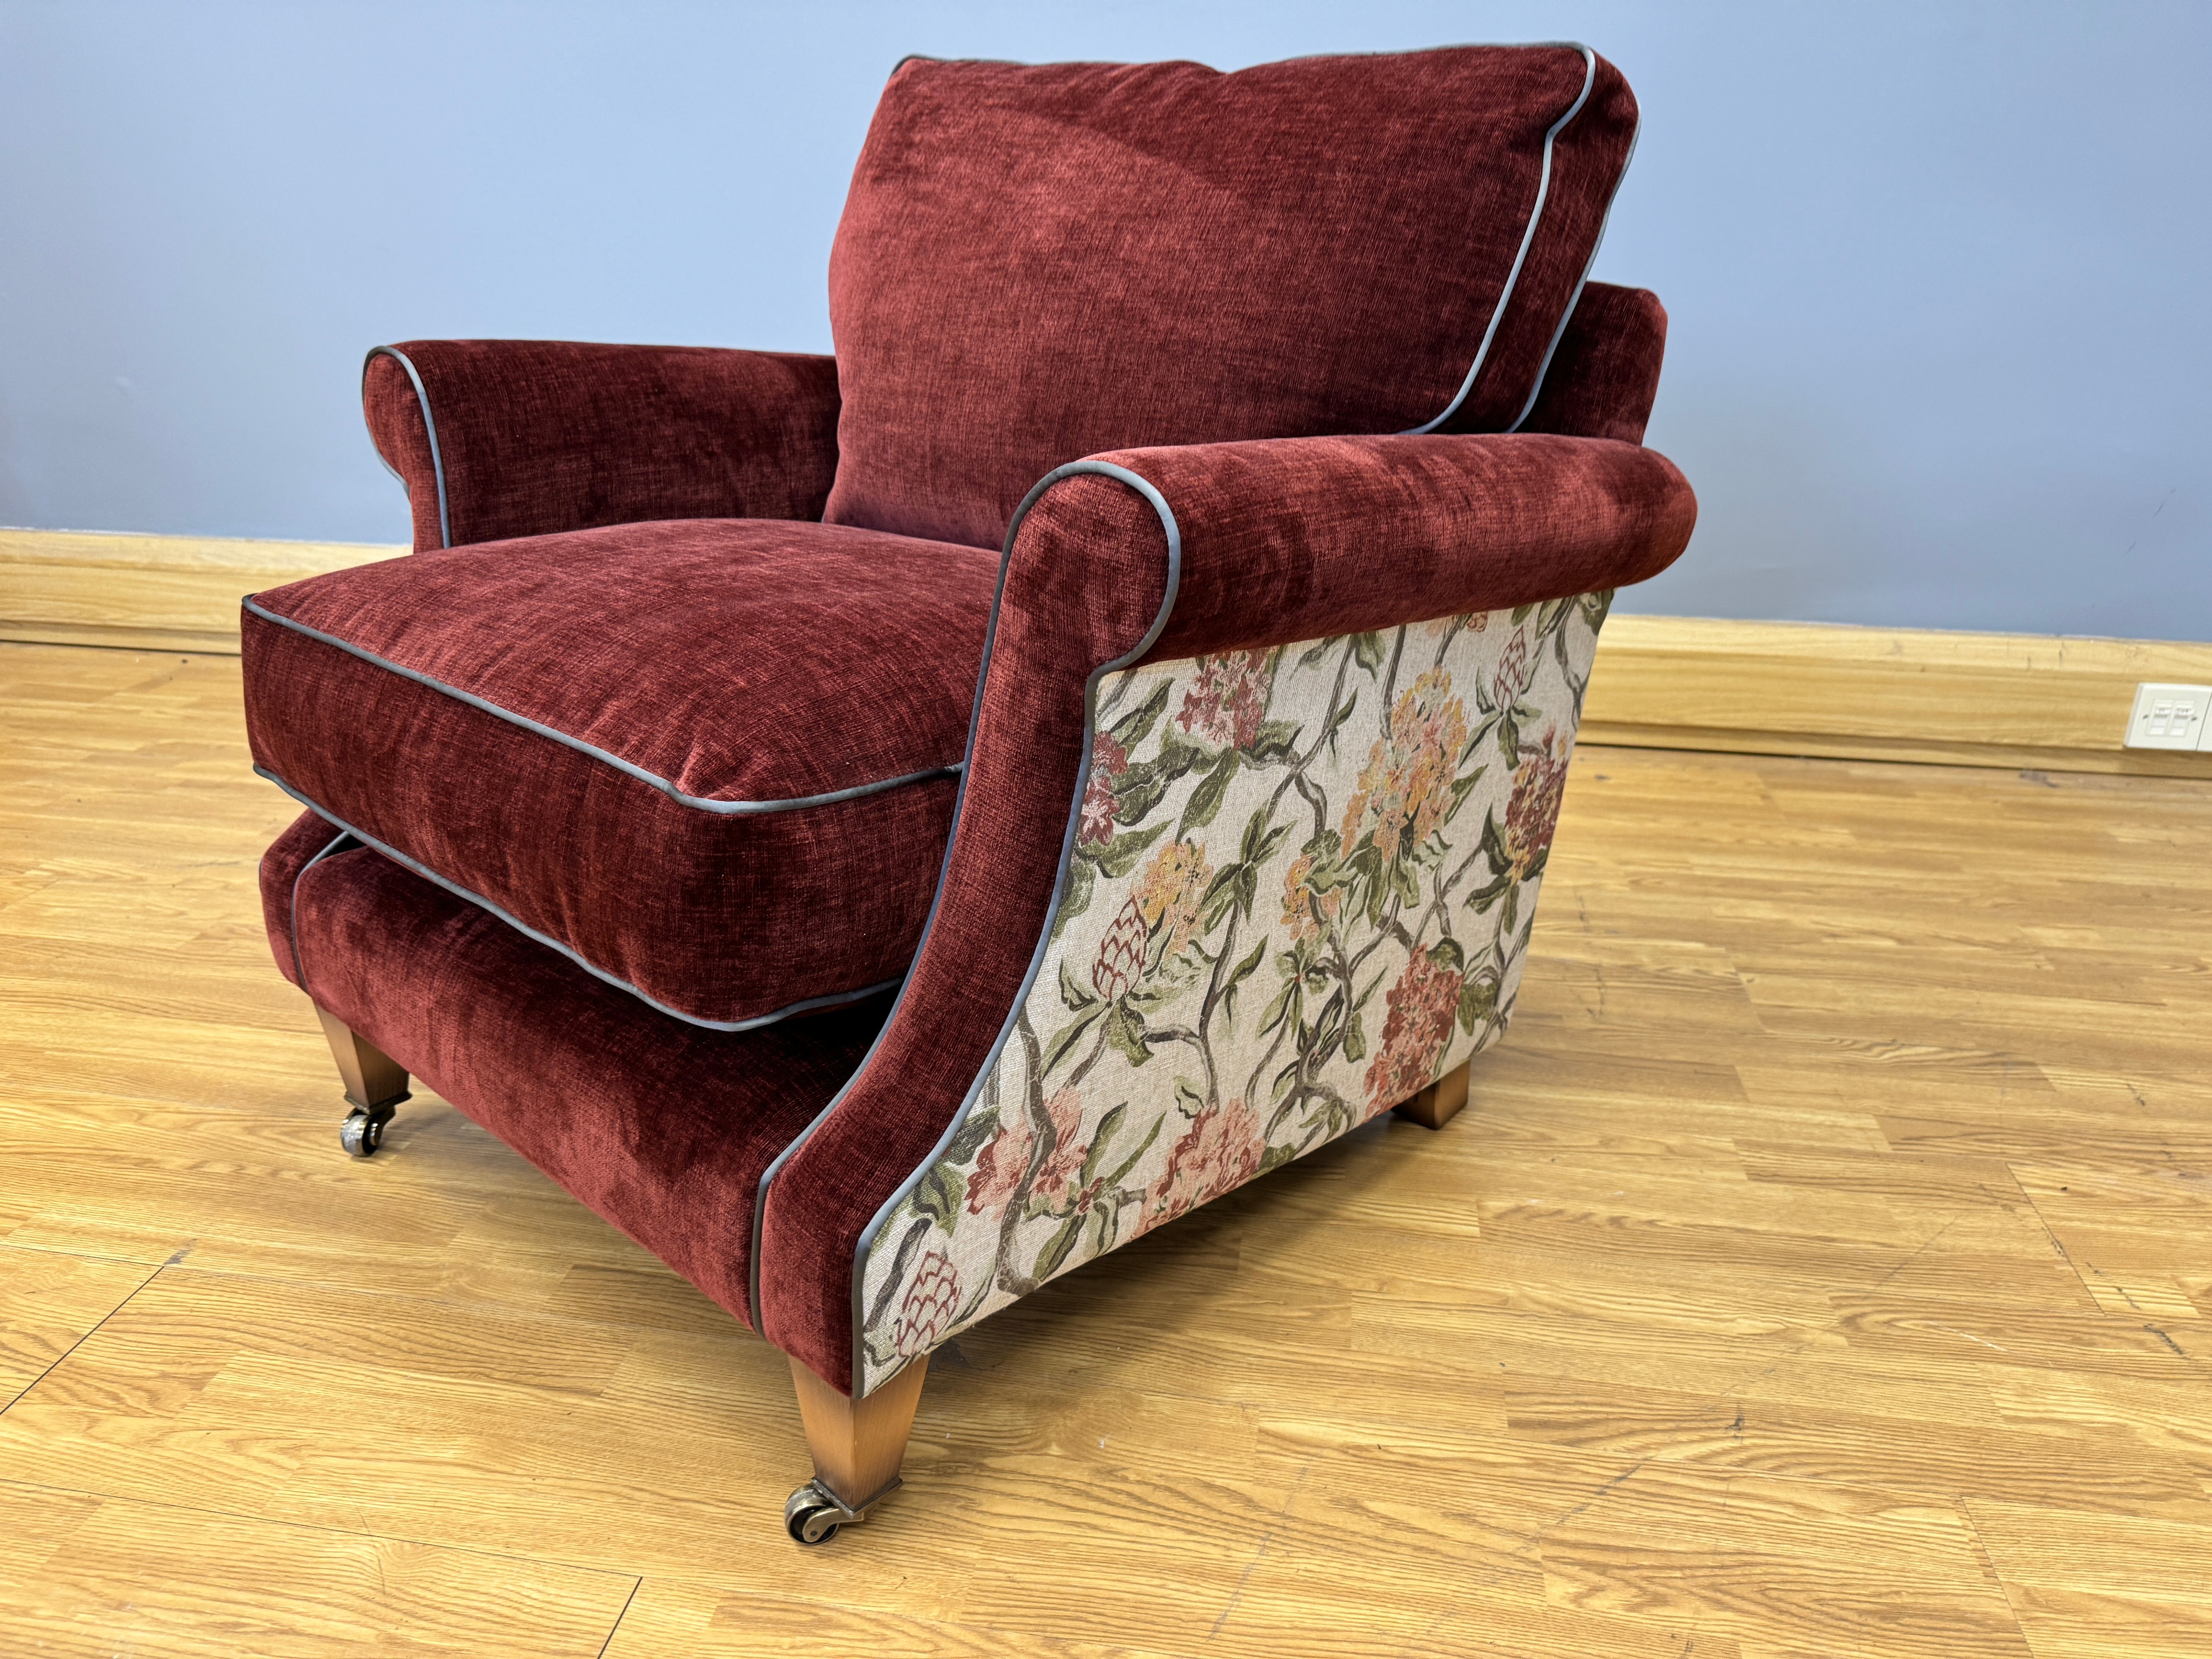 SOFAS & STUFF Cooksbridge accent chair in Red velvet & linen floral outer cover